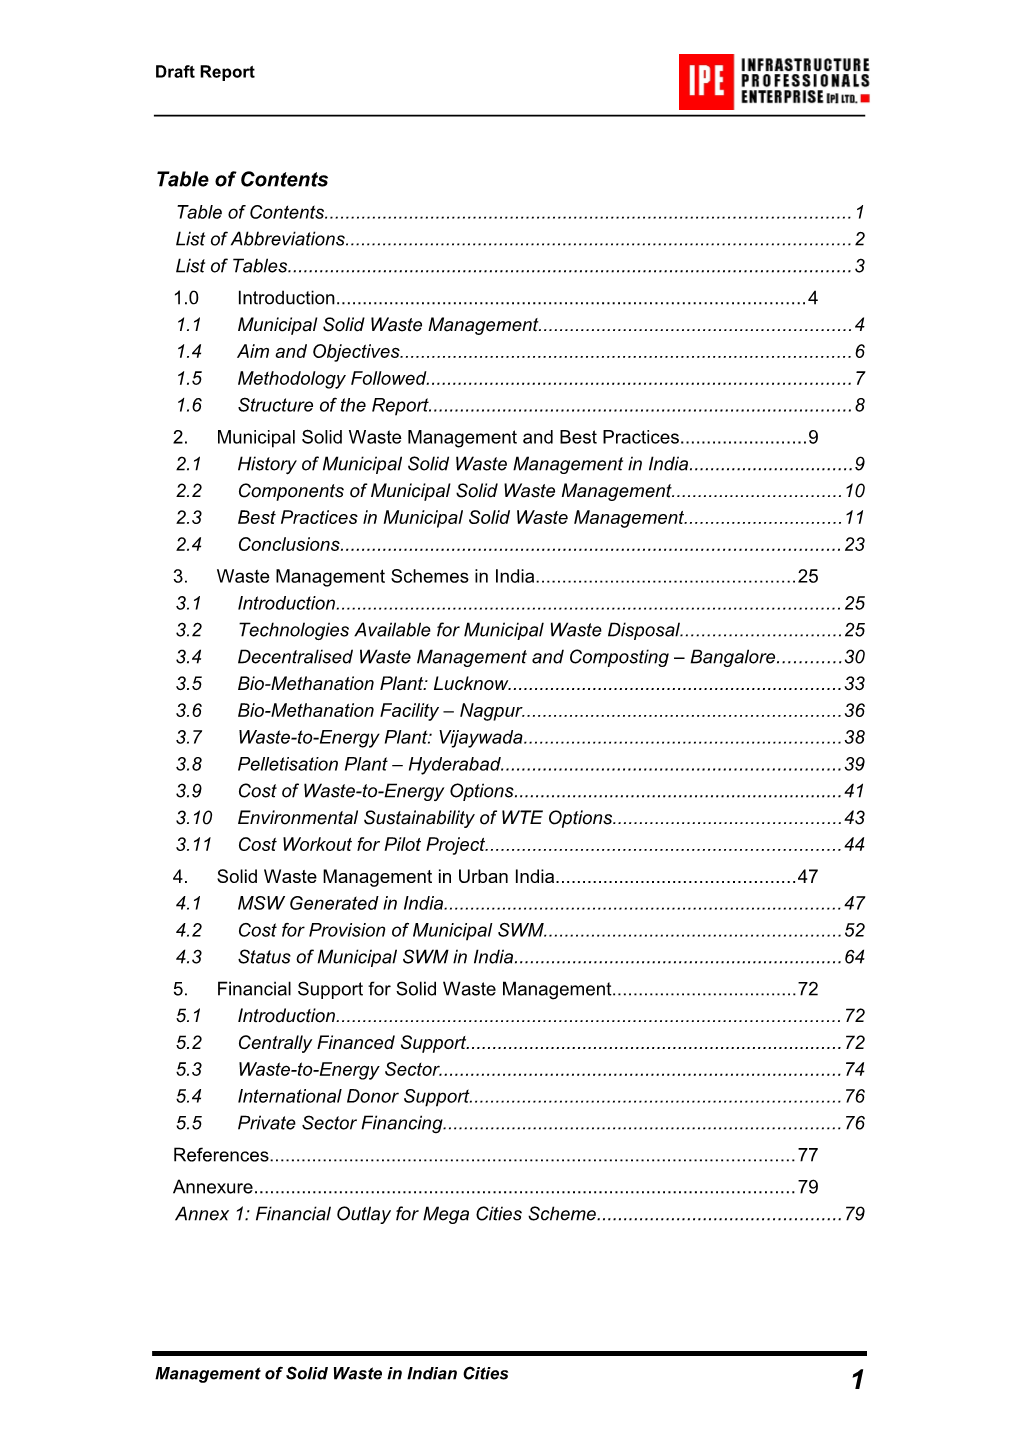 Table of Contents s139